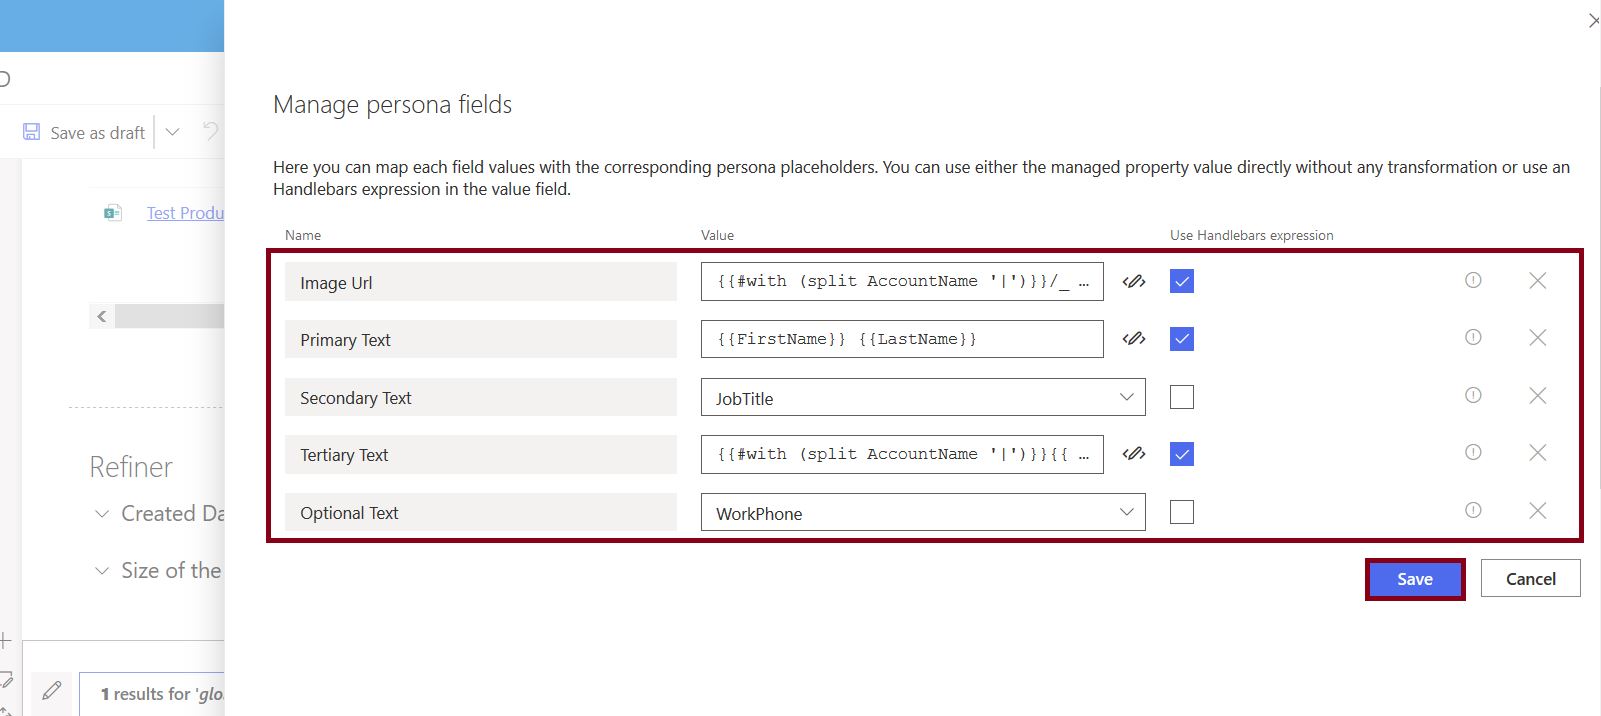 Manage persona fields configuration in modern PnP search result web part, Customize SharePoint search results